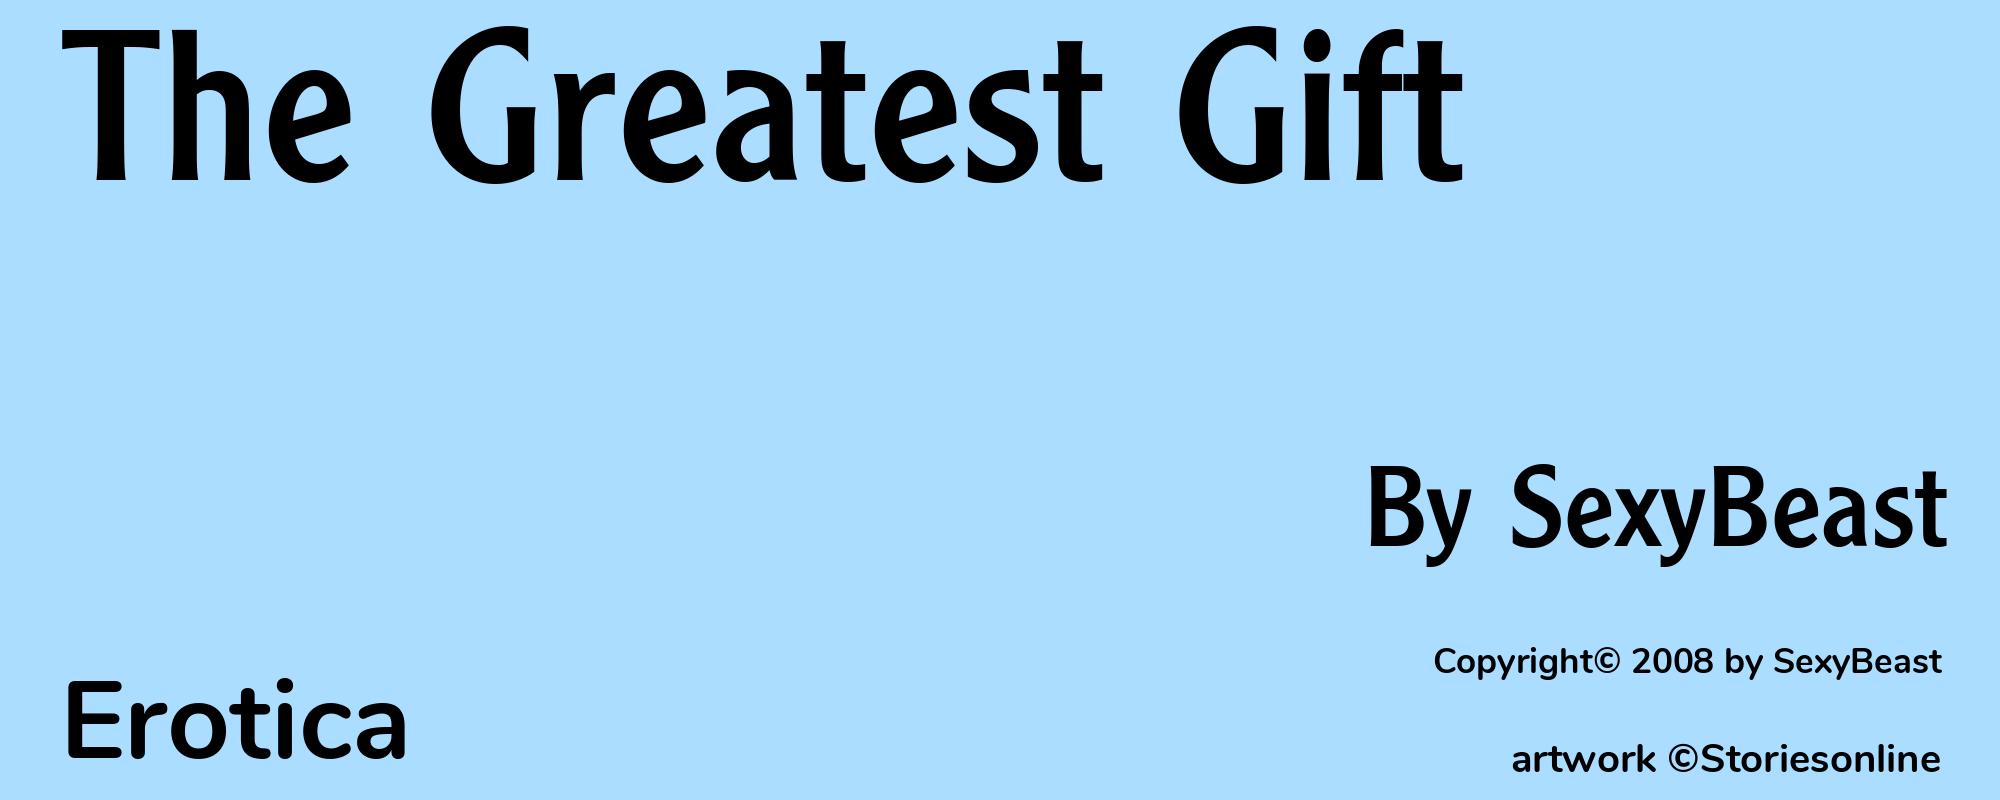 The Greatest Gift - Cover